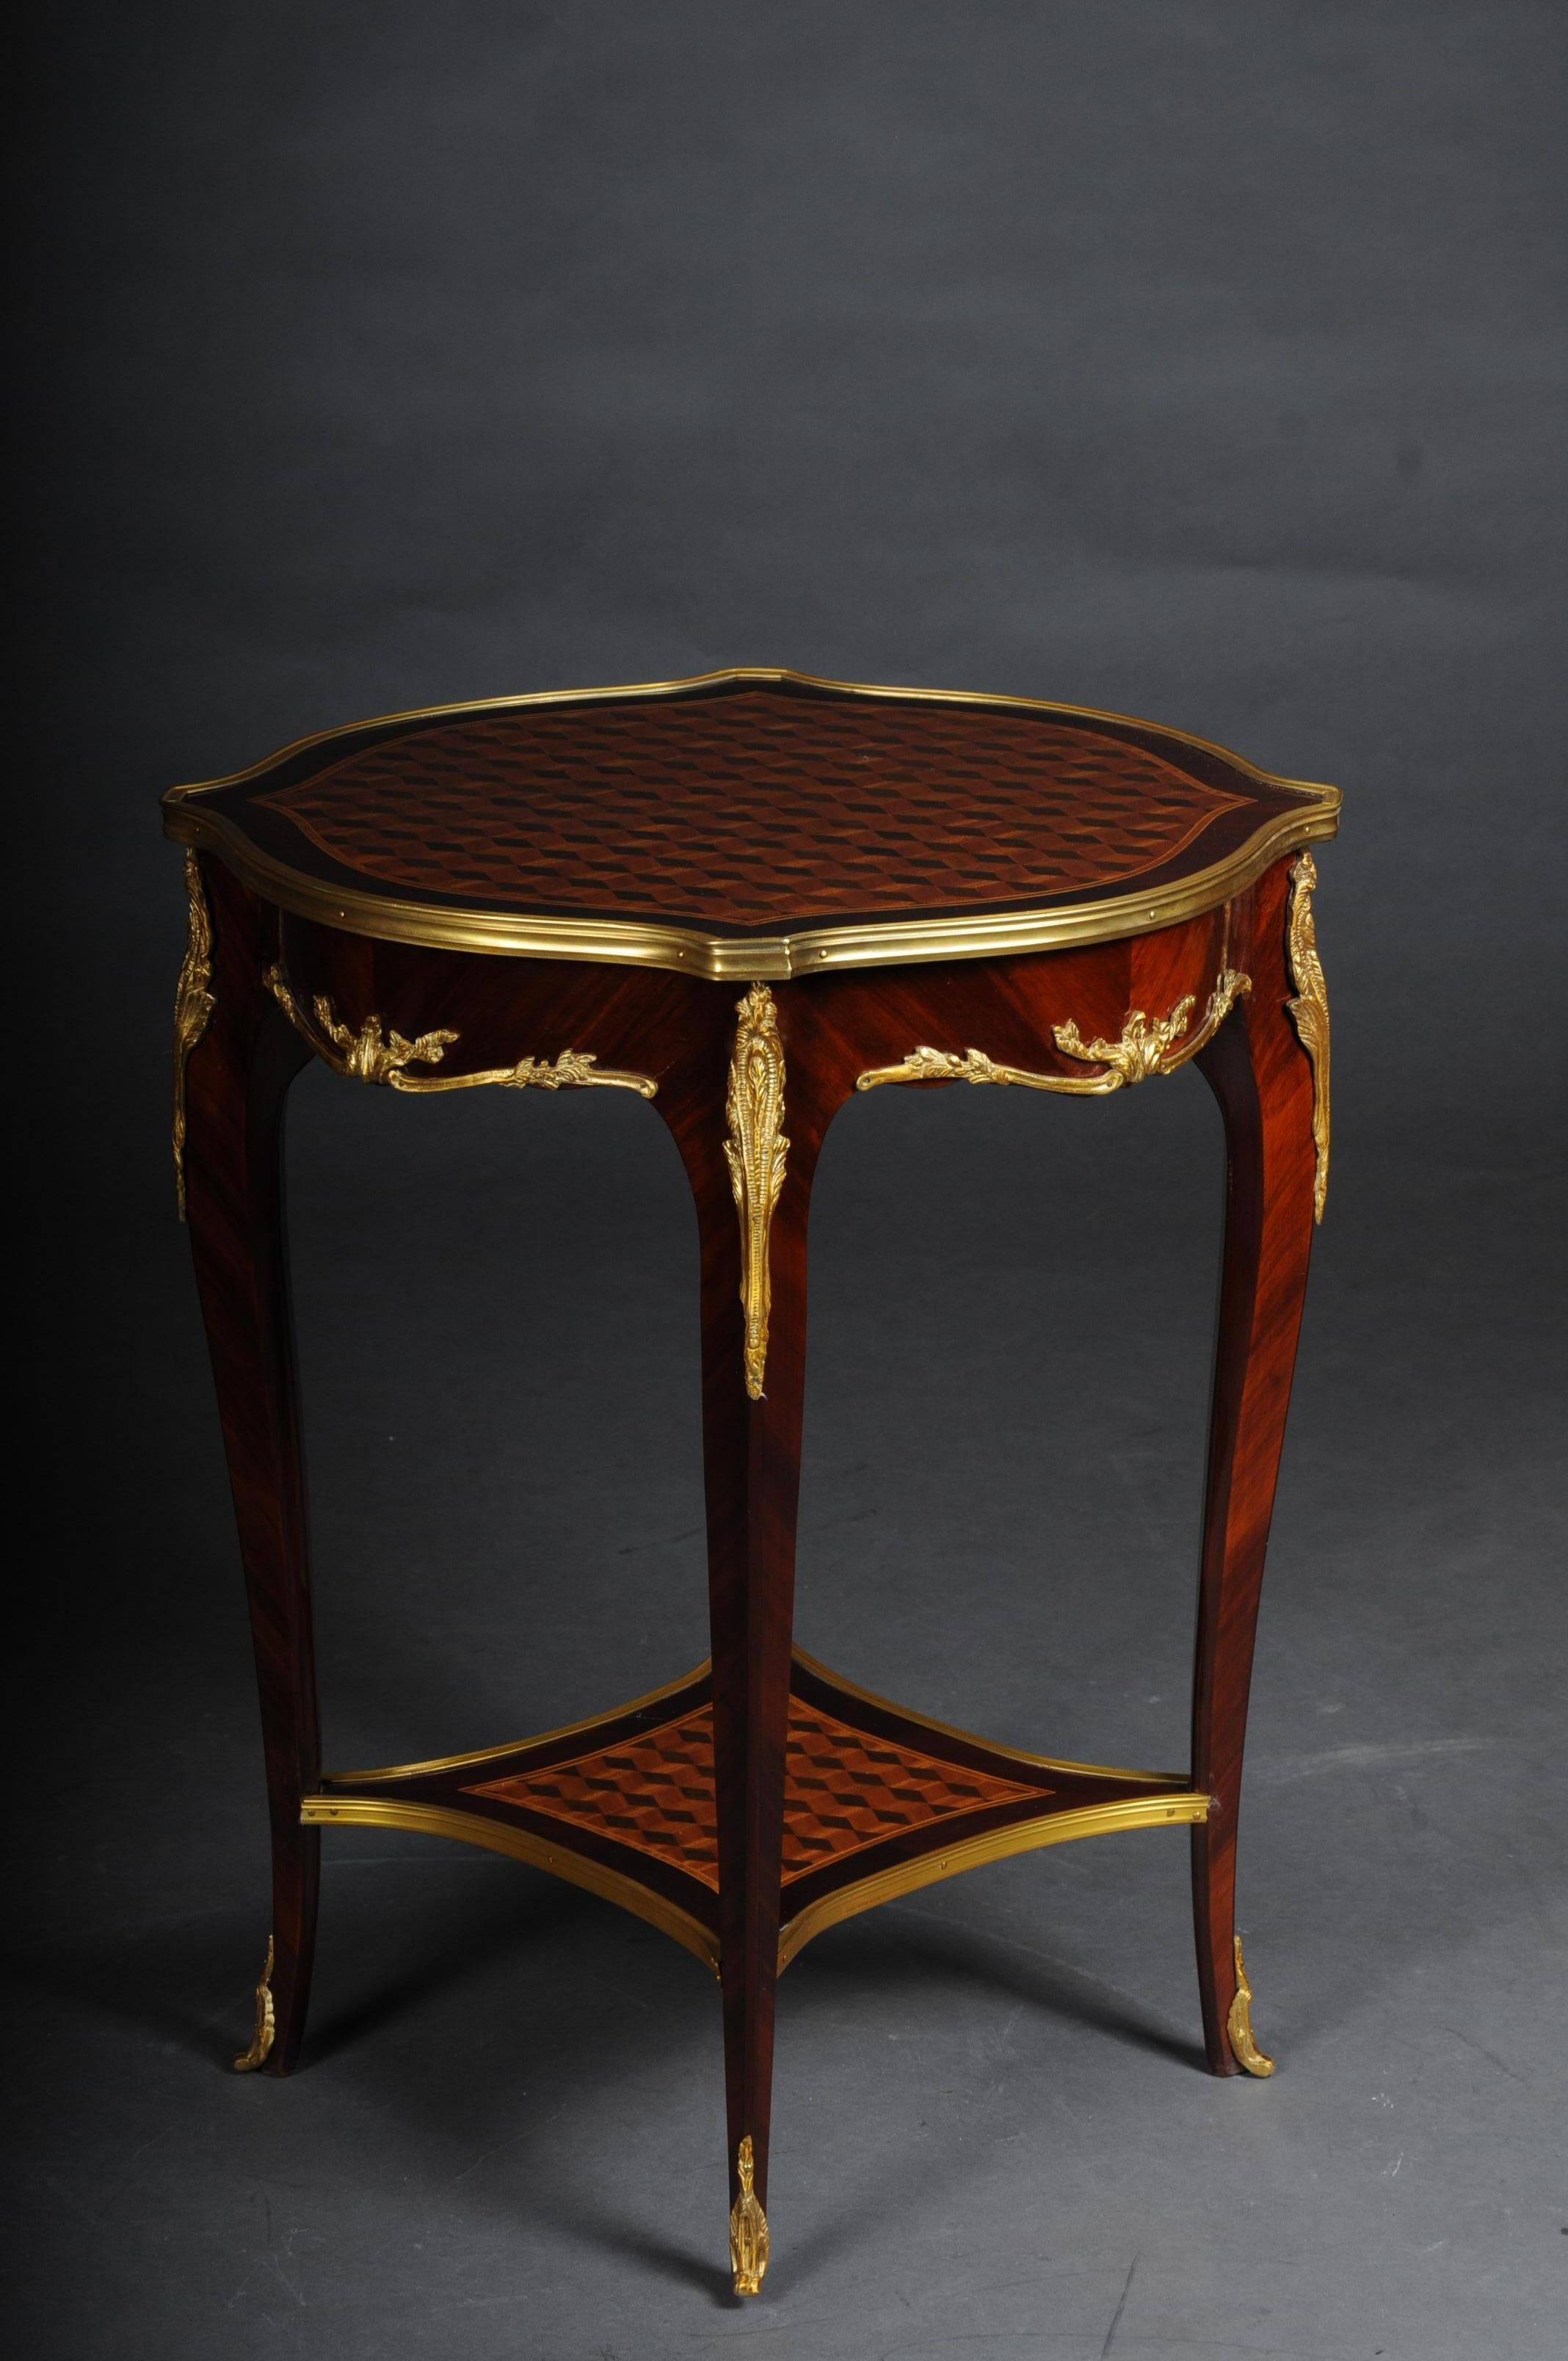 Beautiful salon side table in Louis XV after F. Linke

Veneer on solid beech, daintily finished, body, flanked by solid corner strips on high, elegantly curved legs with bronze fittings ending in sabots. Slightly protruding, round marble top plate